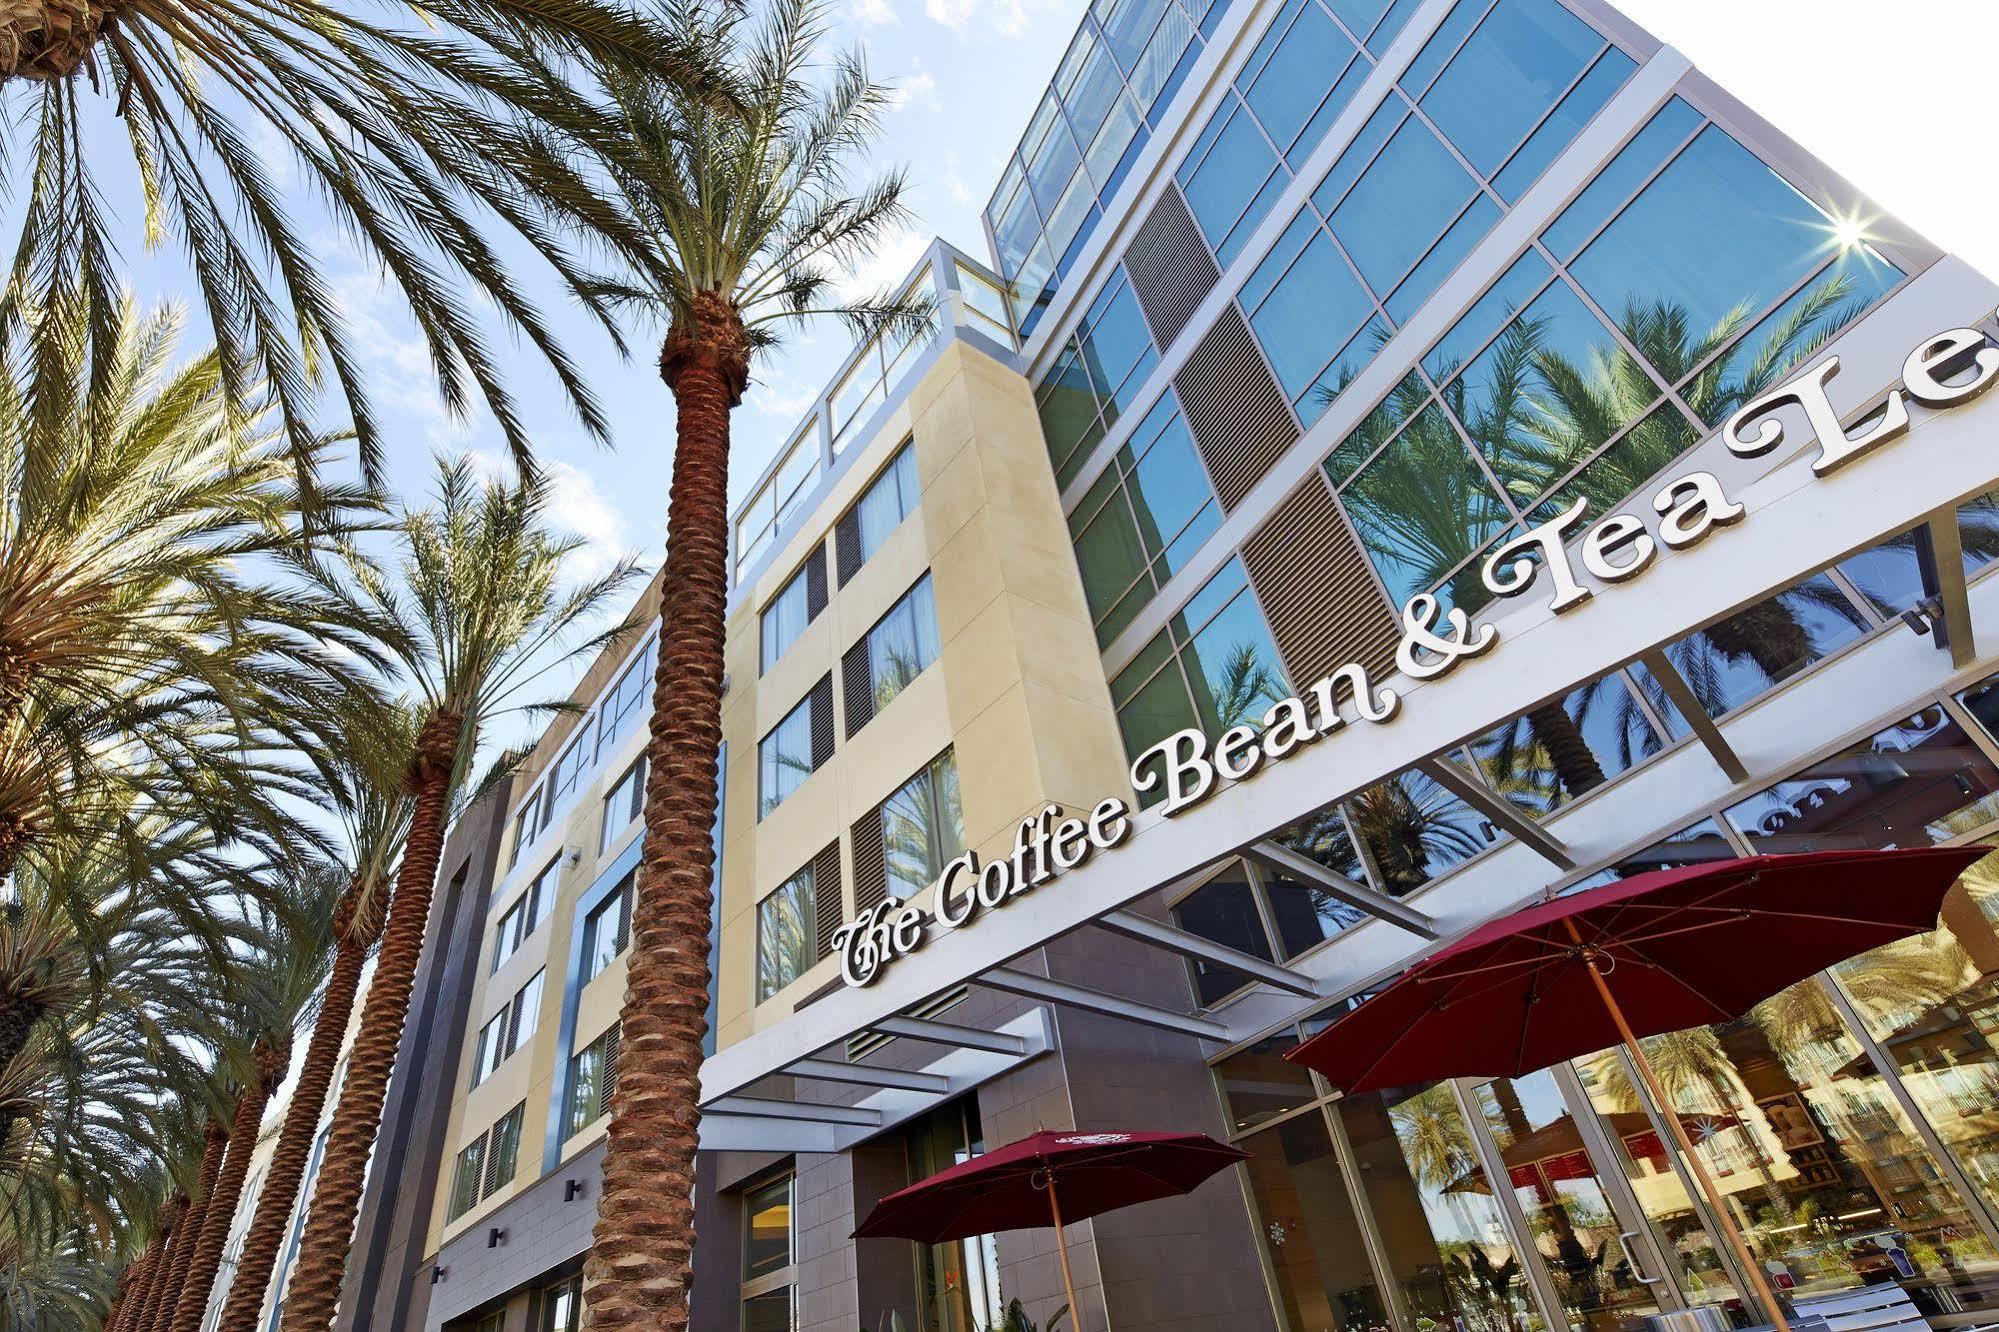 Springhill Suites By Marriott At Anaheim Resort Area/Convention Center Buitenkant foto